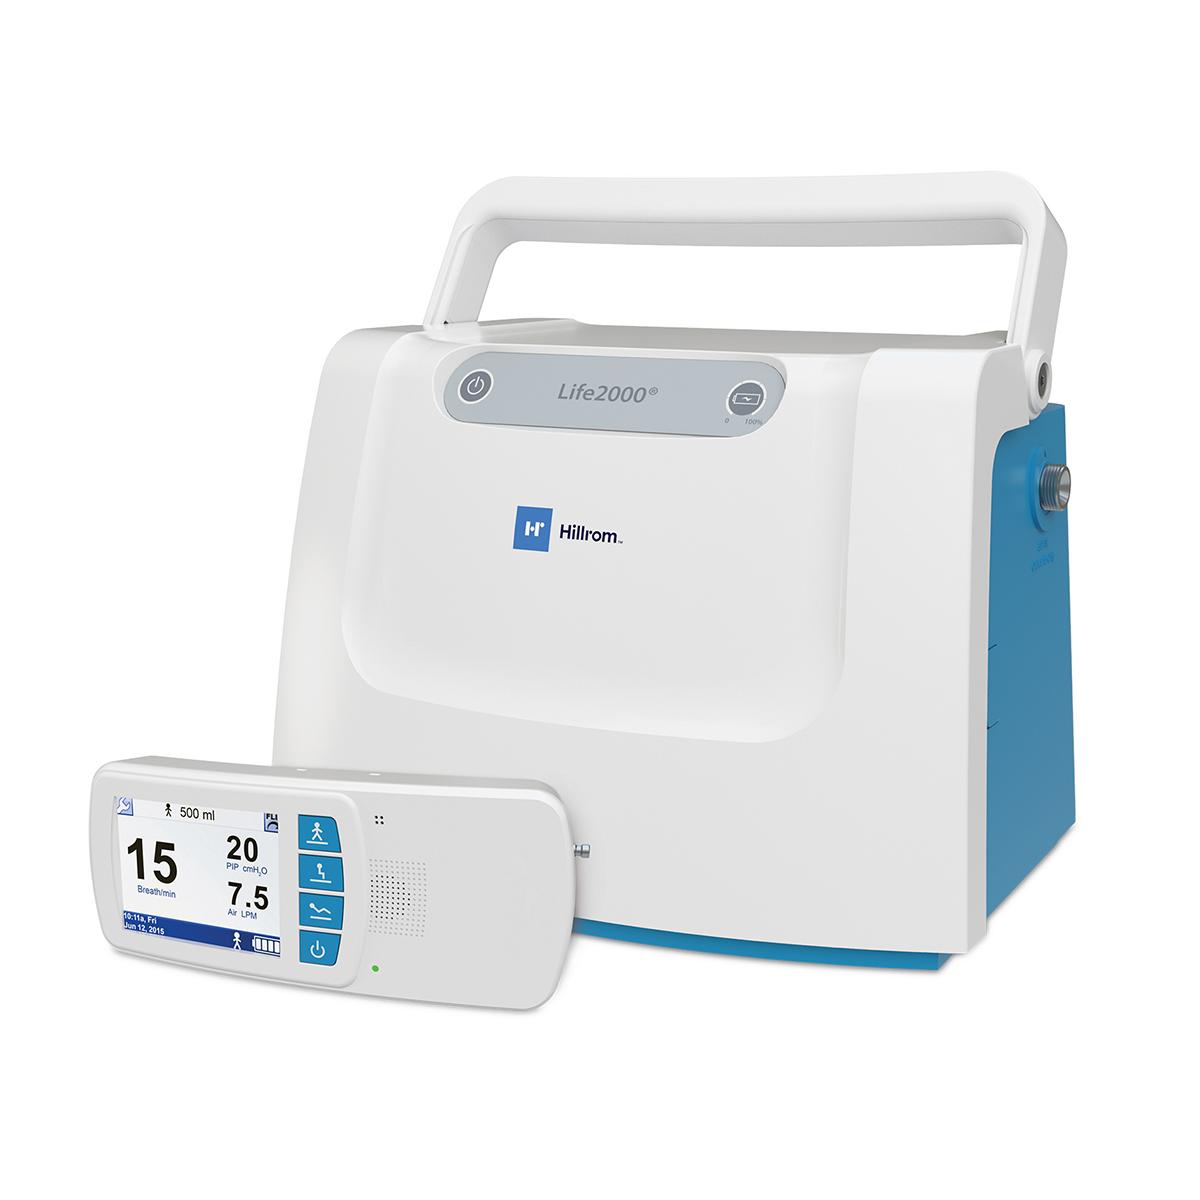 The Hillrom™ Life2000 System's compact compressor and lightweight, wearable ventilator with bright display screen are shown.